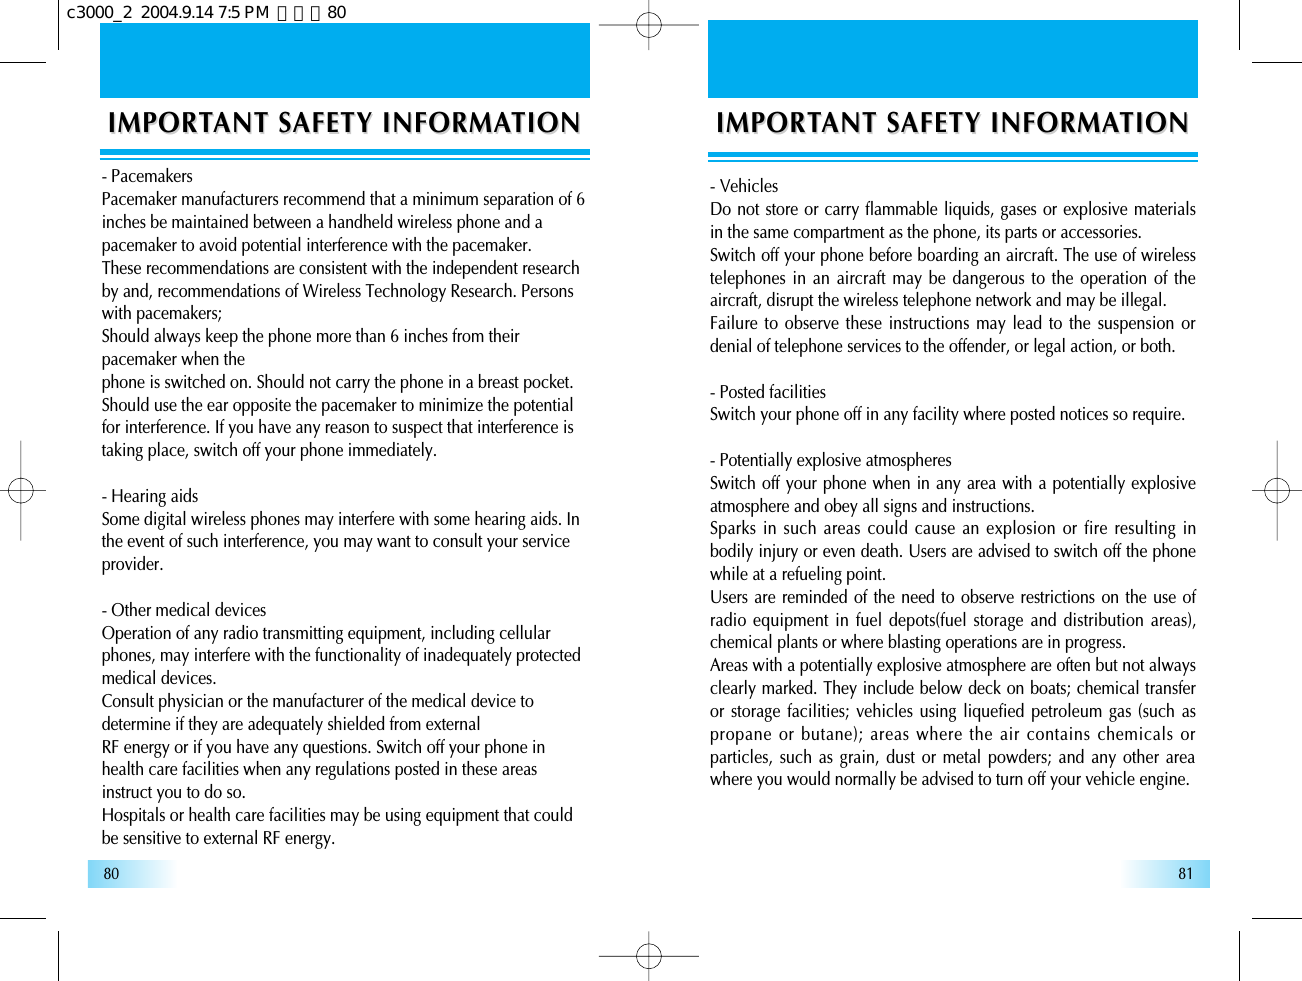 8180IMPORTIMPORTANT SAFETY INFORMAANT SAFETY INFORMATIONTION- VehiclesDo not store or carry flammable liquids, gases or explosive materialsin the same compartment as the phone, its parts or accessories.Switch off your phone before boarding an aircraft. The use of wirelesstelephones in an aircraft may be dangerous to the operation of theaircraft, disrupt the wireless telephone network and may be illegal.Failure to observe these instructions may lead to the suspension ordenial of telephone services to the offender, or legal action, or both.- Posted facilitiesSwitch your phone off in any facility where posted notices so require.- Potentially explosive atmospheresSwitch off your phone when in any area with a potentially explosiveatmosphere and obey all signs and instructions.Sparks in such areas could cause an explosion or fire resulting inbodily injury or even death. Users are advised to switch off the phonewhile at a refueling point.Users are reminded of the need to observe restrictions on the use ofradio equipment in fuel depots(fuel storage and distribution areas),chemical plants or where blasting operations are in progress.Areas with a potentially explosive atmosphere are often but not alwaysclearly marked. They include below deck on boats; chemical transferor storage facilities; vehicles using liquefied petroleum gas (such aspropane or butane); areas where the air contains chemicals orparticles, such as grain, dust or metal powders; and any other areawhere you would normally be advised to turn off your vehicle engine.IMPORTIMPORTANT SAFETY INFORMAANT SAFETY INFORMATIONTION- PacemakersPacemaker manufacturers recommend that a minimum separation of 6inches be maintained between a handheld wireless phone and apacemaker to avoid potential interference with the pacemaker.These recommendations are consistent with the independent researchby and, recommendations of Wireless Technology Research. Personswith pacemakers;Should always keep the phone more than 6 inches from theirpacemaker when thephone is switched on. Should not carry the phone in a breast pocket.Should use the ear opposite the pacemaker to minimize the potentialfor interference. If you have any reason to suspect that interference istaking place, switch off your phone immediately.- Hearing aidsSome digital wireless phones may interfere with some hearing aids. Inthe event of such interference, you may want to consult your serviceprovider.- Other medical devicesOperation of any radio transmitting equipment, including cellularphones, may interfere with the functionality of inadequately protectedmedical devices.Consult physician or the manufacturer of the medical device todetermine if they are adequately shielded from externalRF energy or if you have any questions. Switch off your phone inhealth care facilities when any regulations posted in these areasinstruct you to do so.Hospitals or health care facilities may be using equipment that couldbe sensitive to external RF energy.c3000_2  2004.9.14 7:5 PM  페이지80